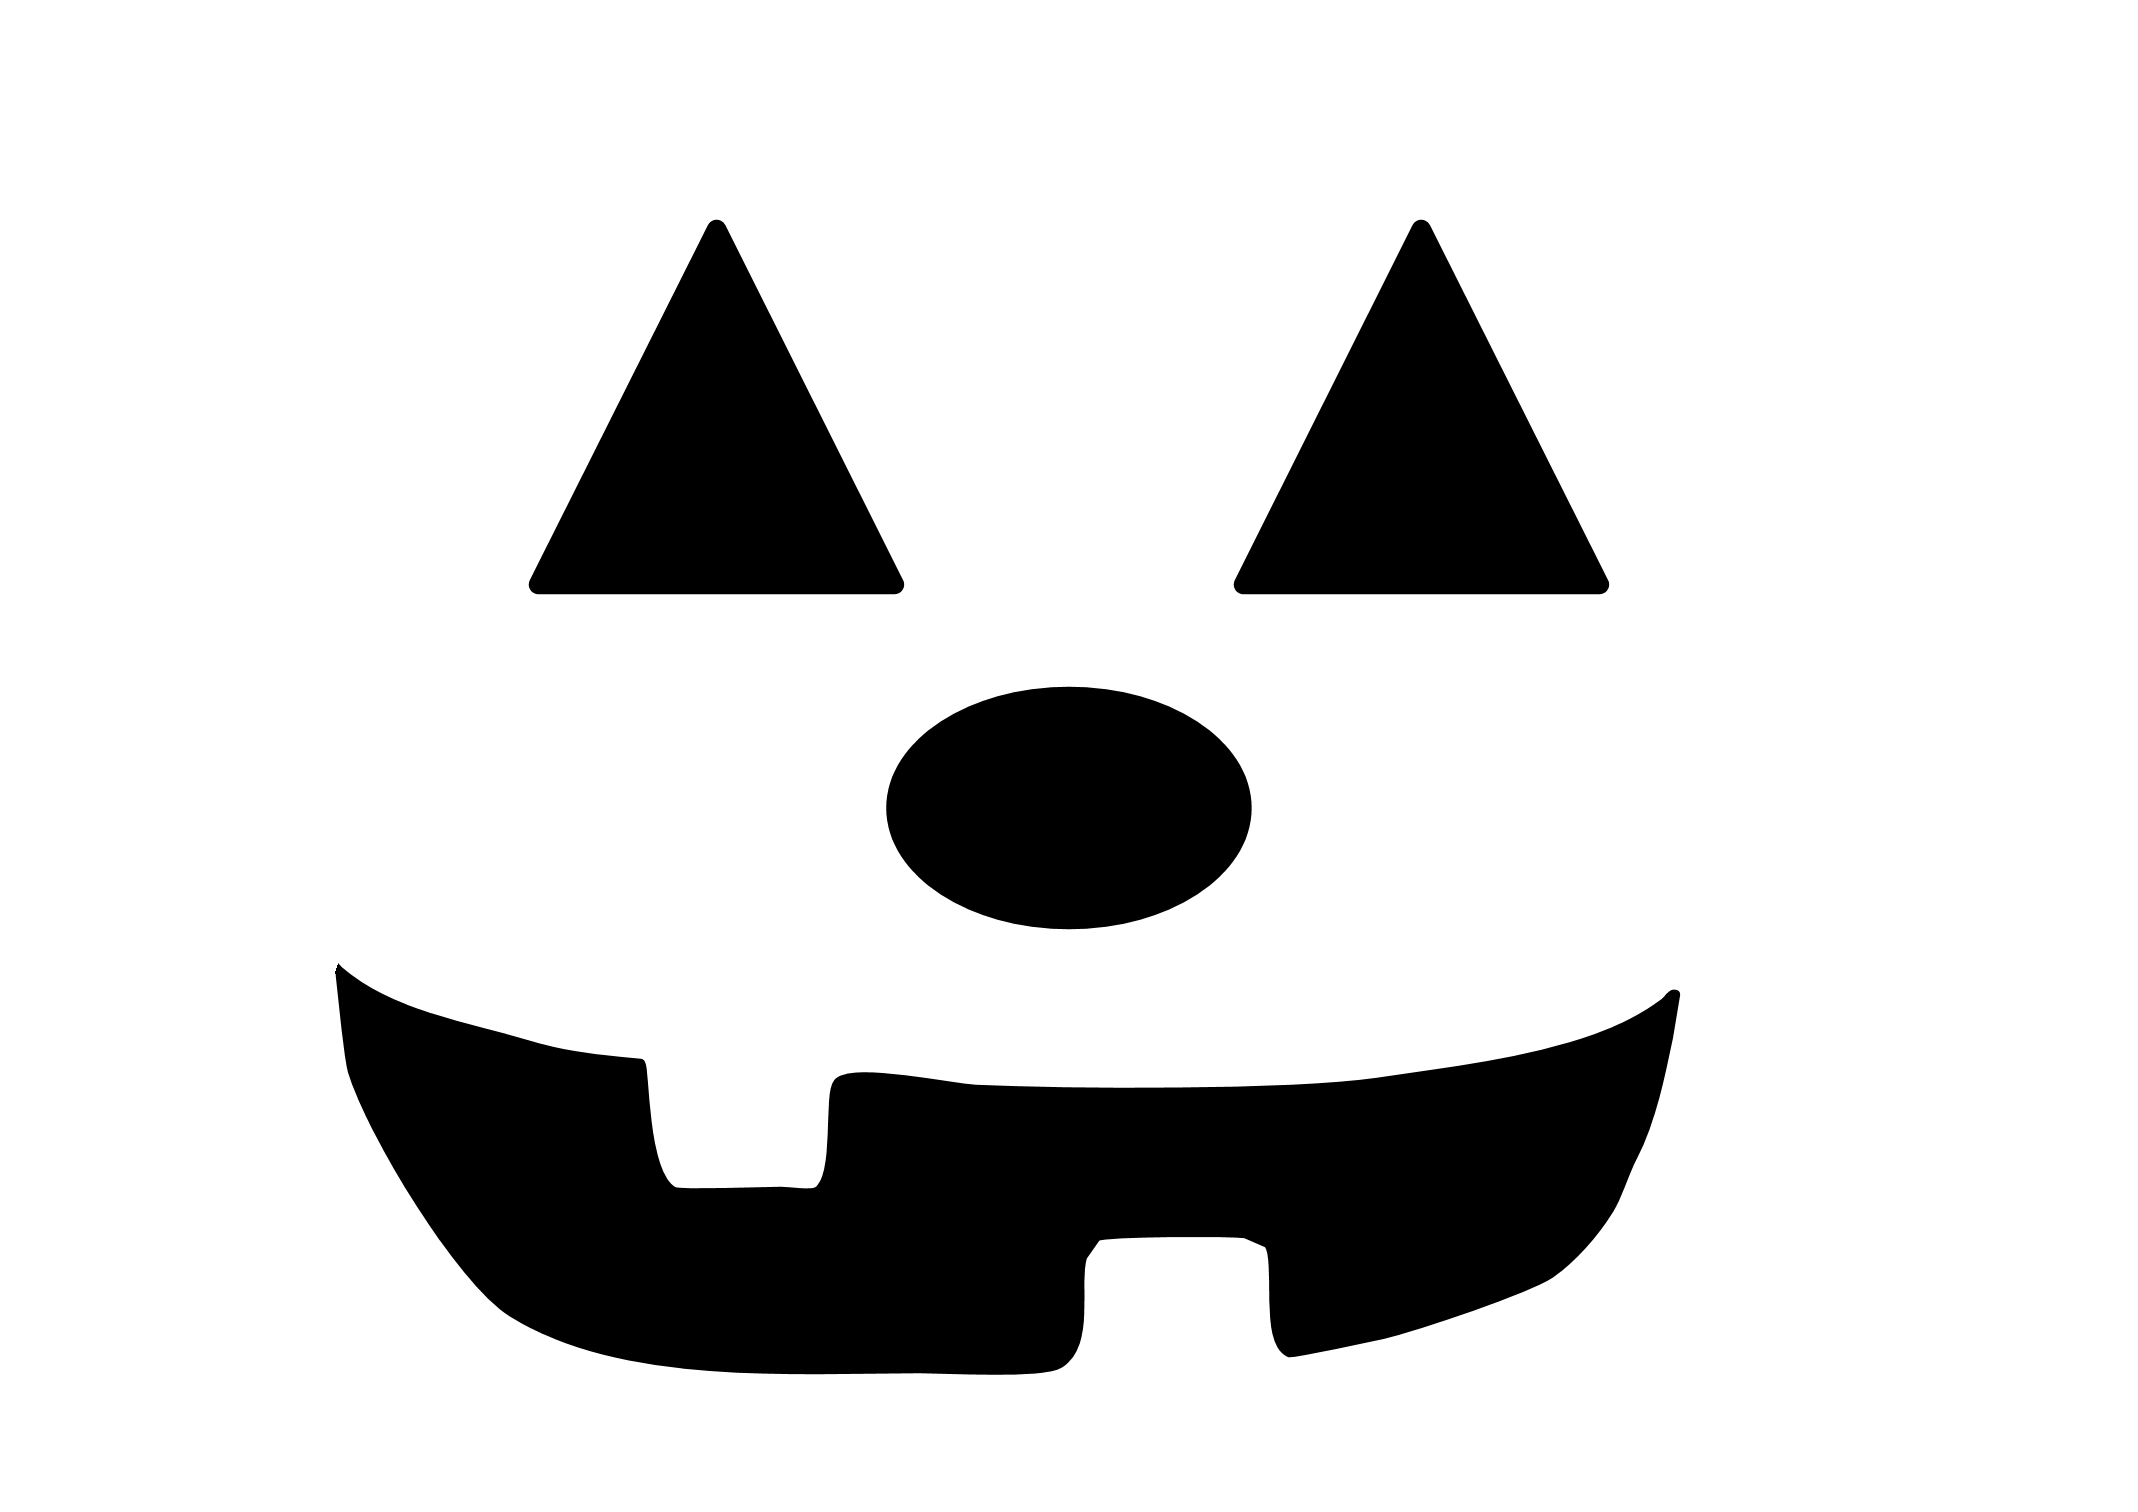 100+ Free Pumpkin Carving Patterns to Download for Halloween